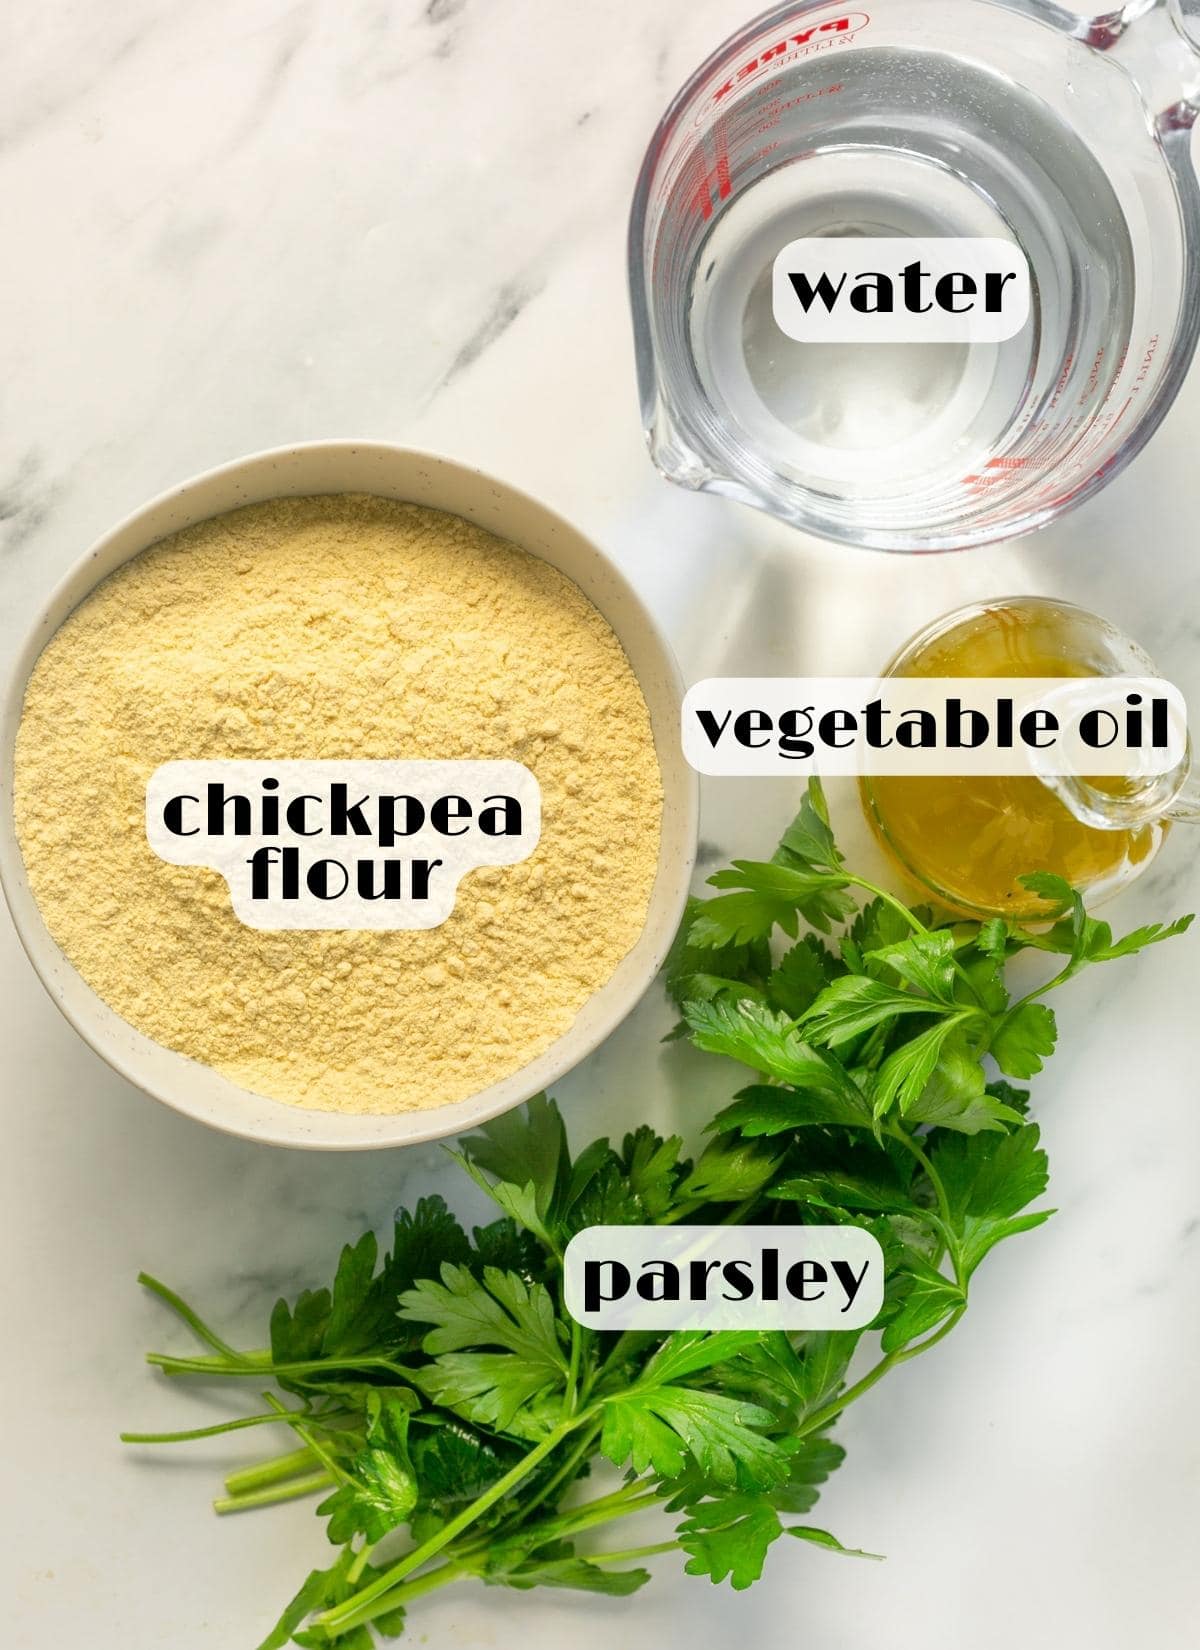 panelle ingredients: chickpea flour, water, parsley, vegetable oil for frying.